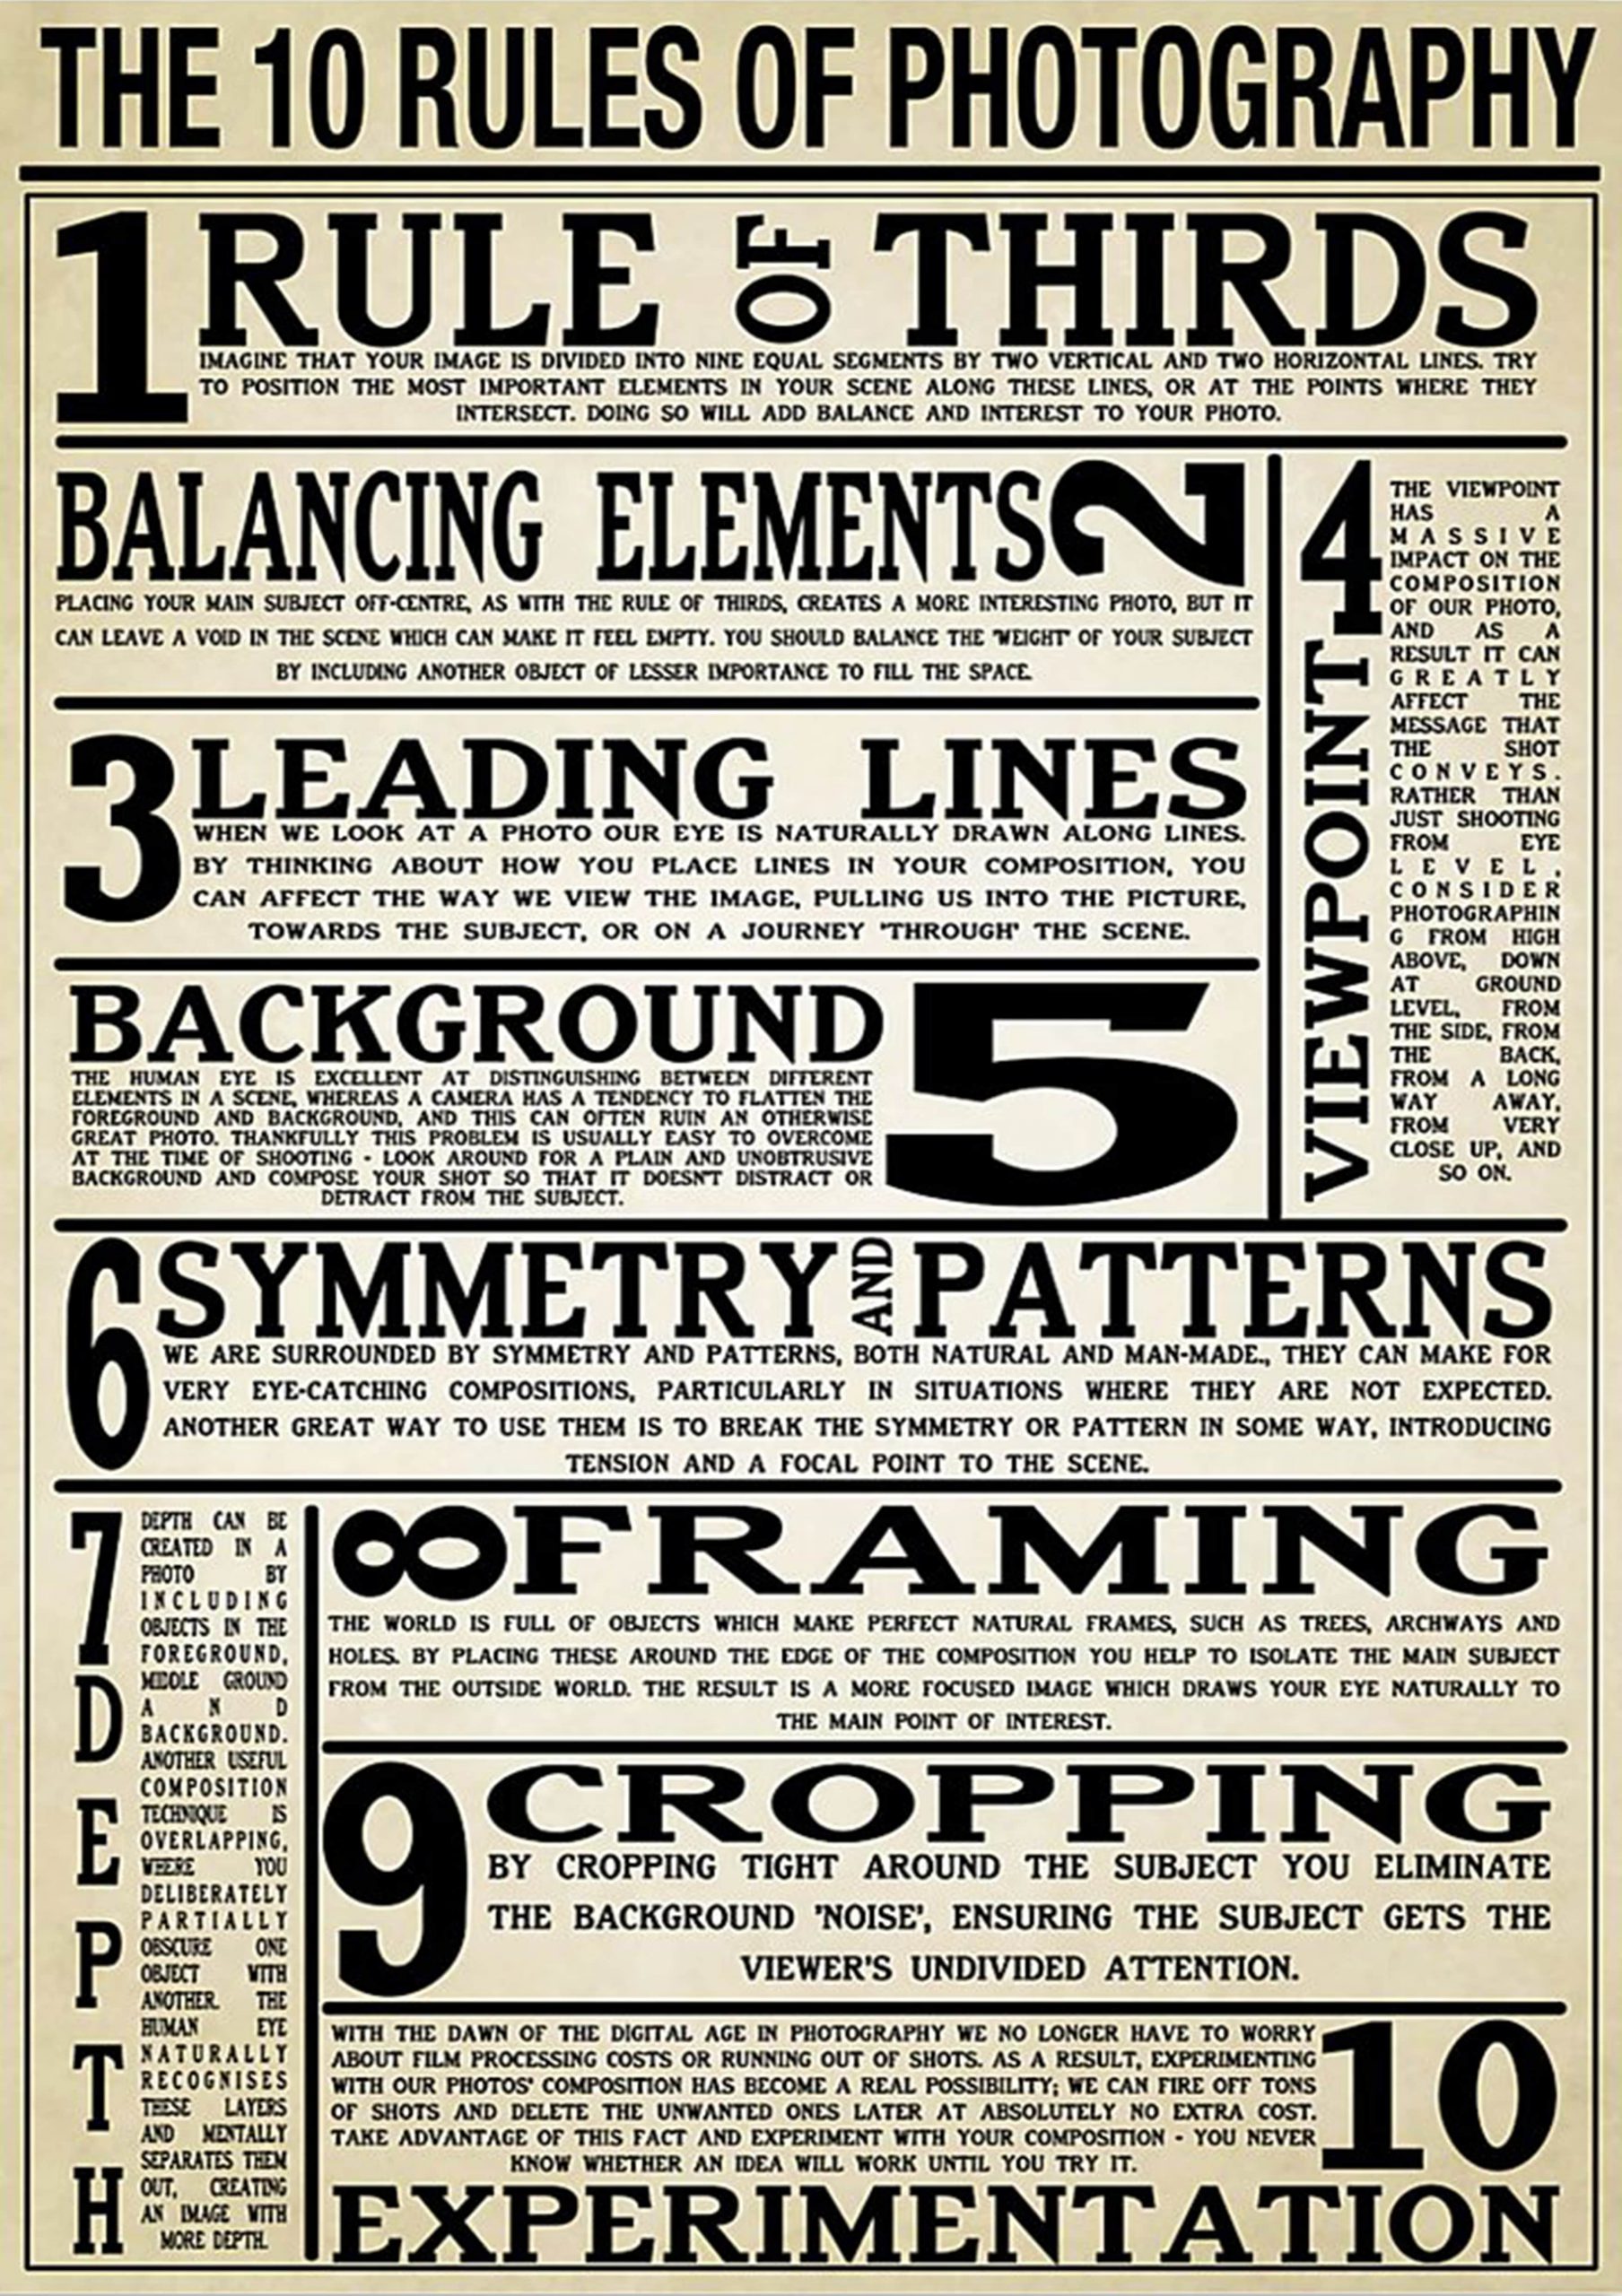 vintage the 10 rules of photography poster 1 - Copy (2)